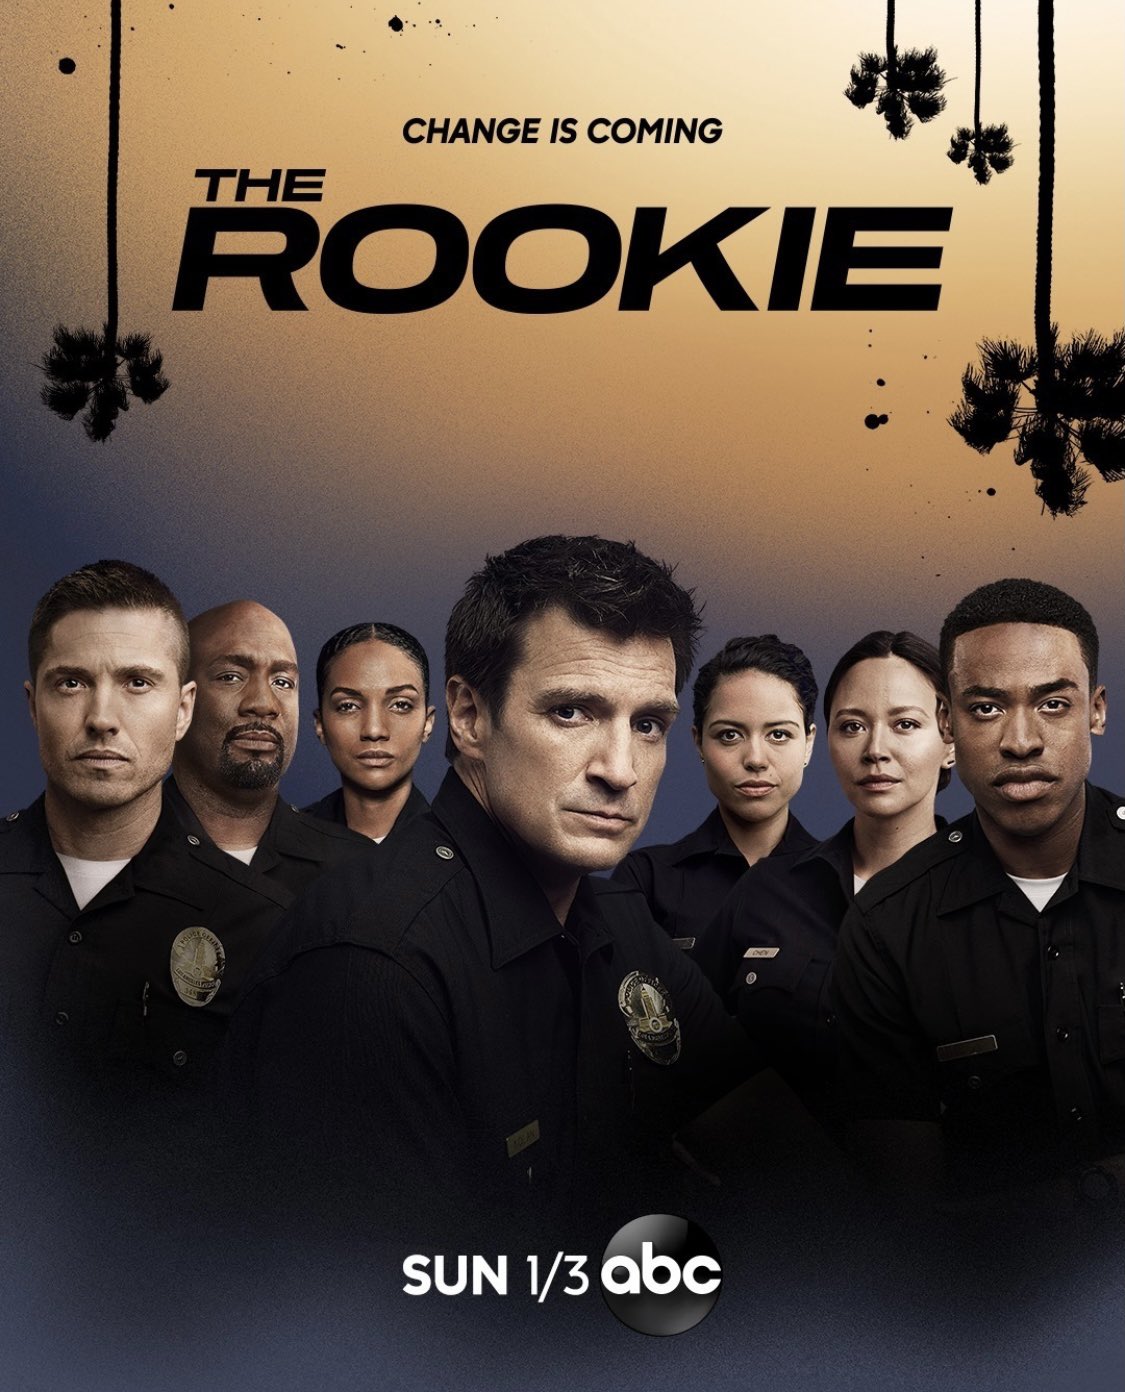 THE ROOKIE Season 3 Trailer, Clips, Images and Poster | The ...